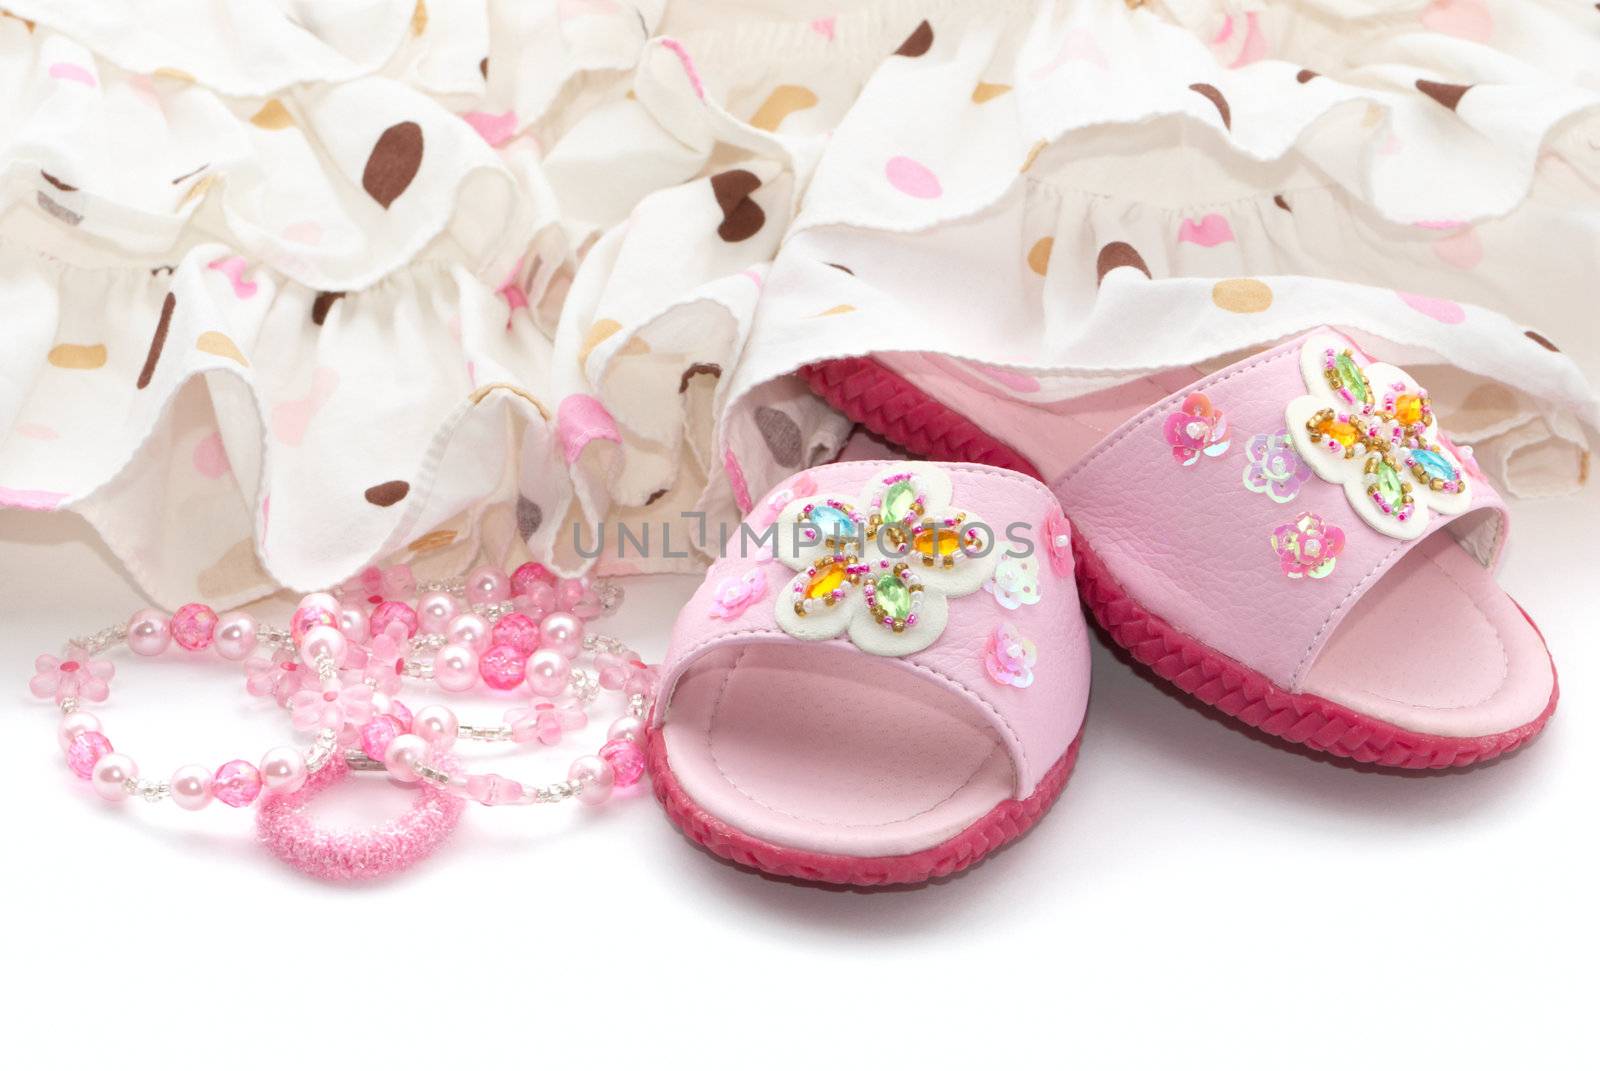 Pink child's shoes and beads